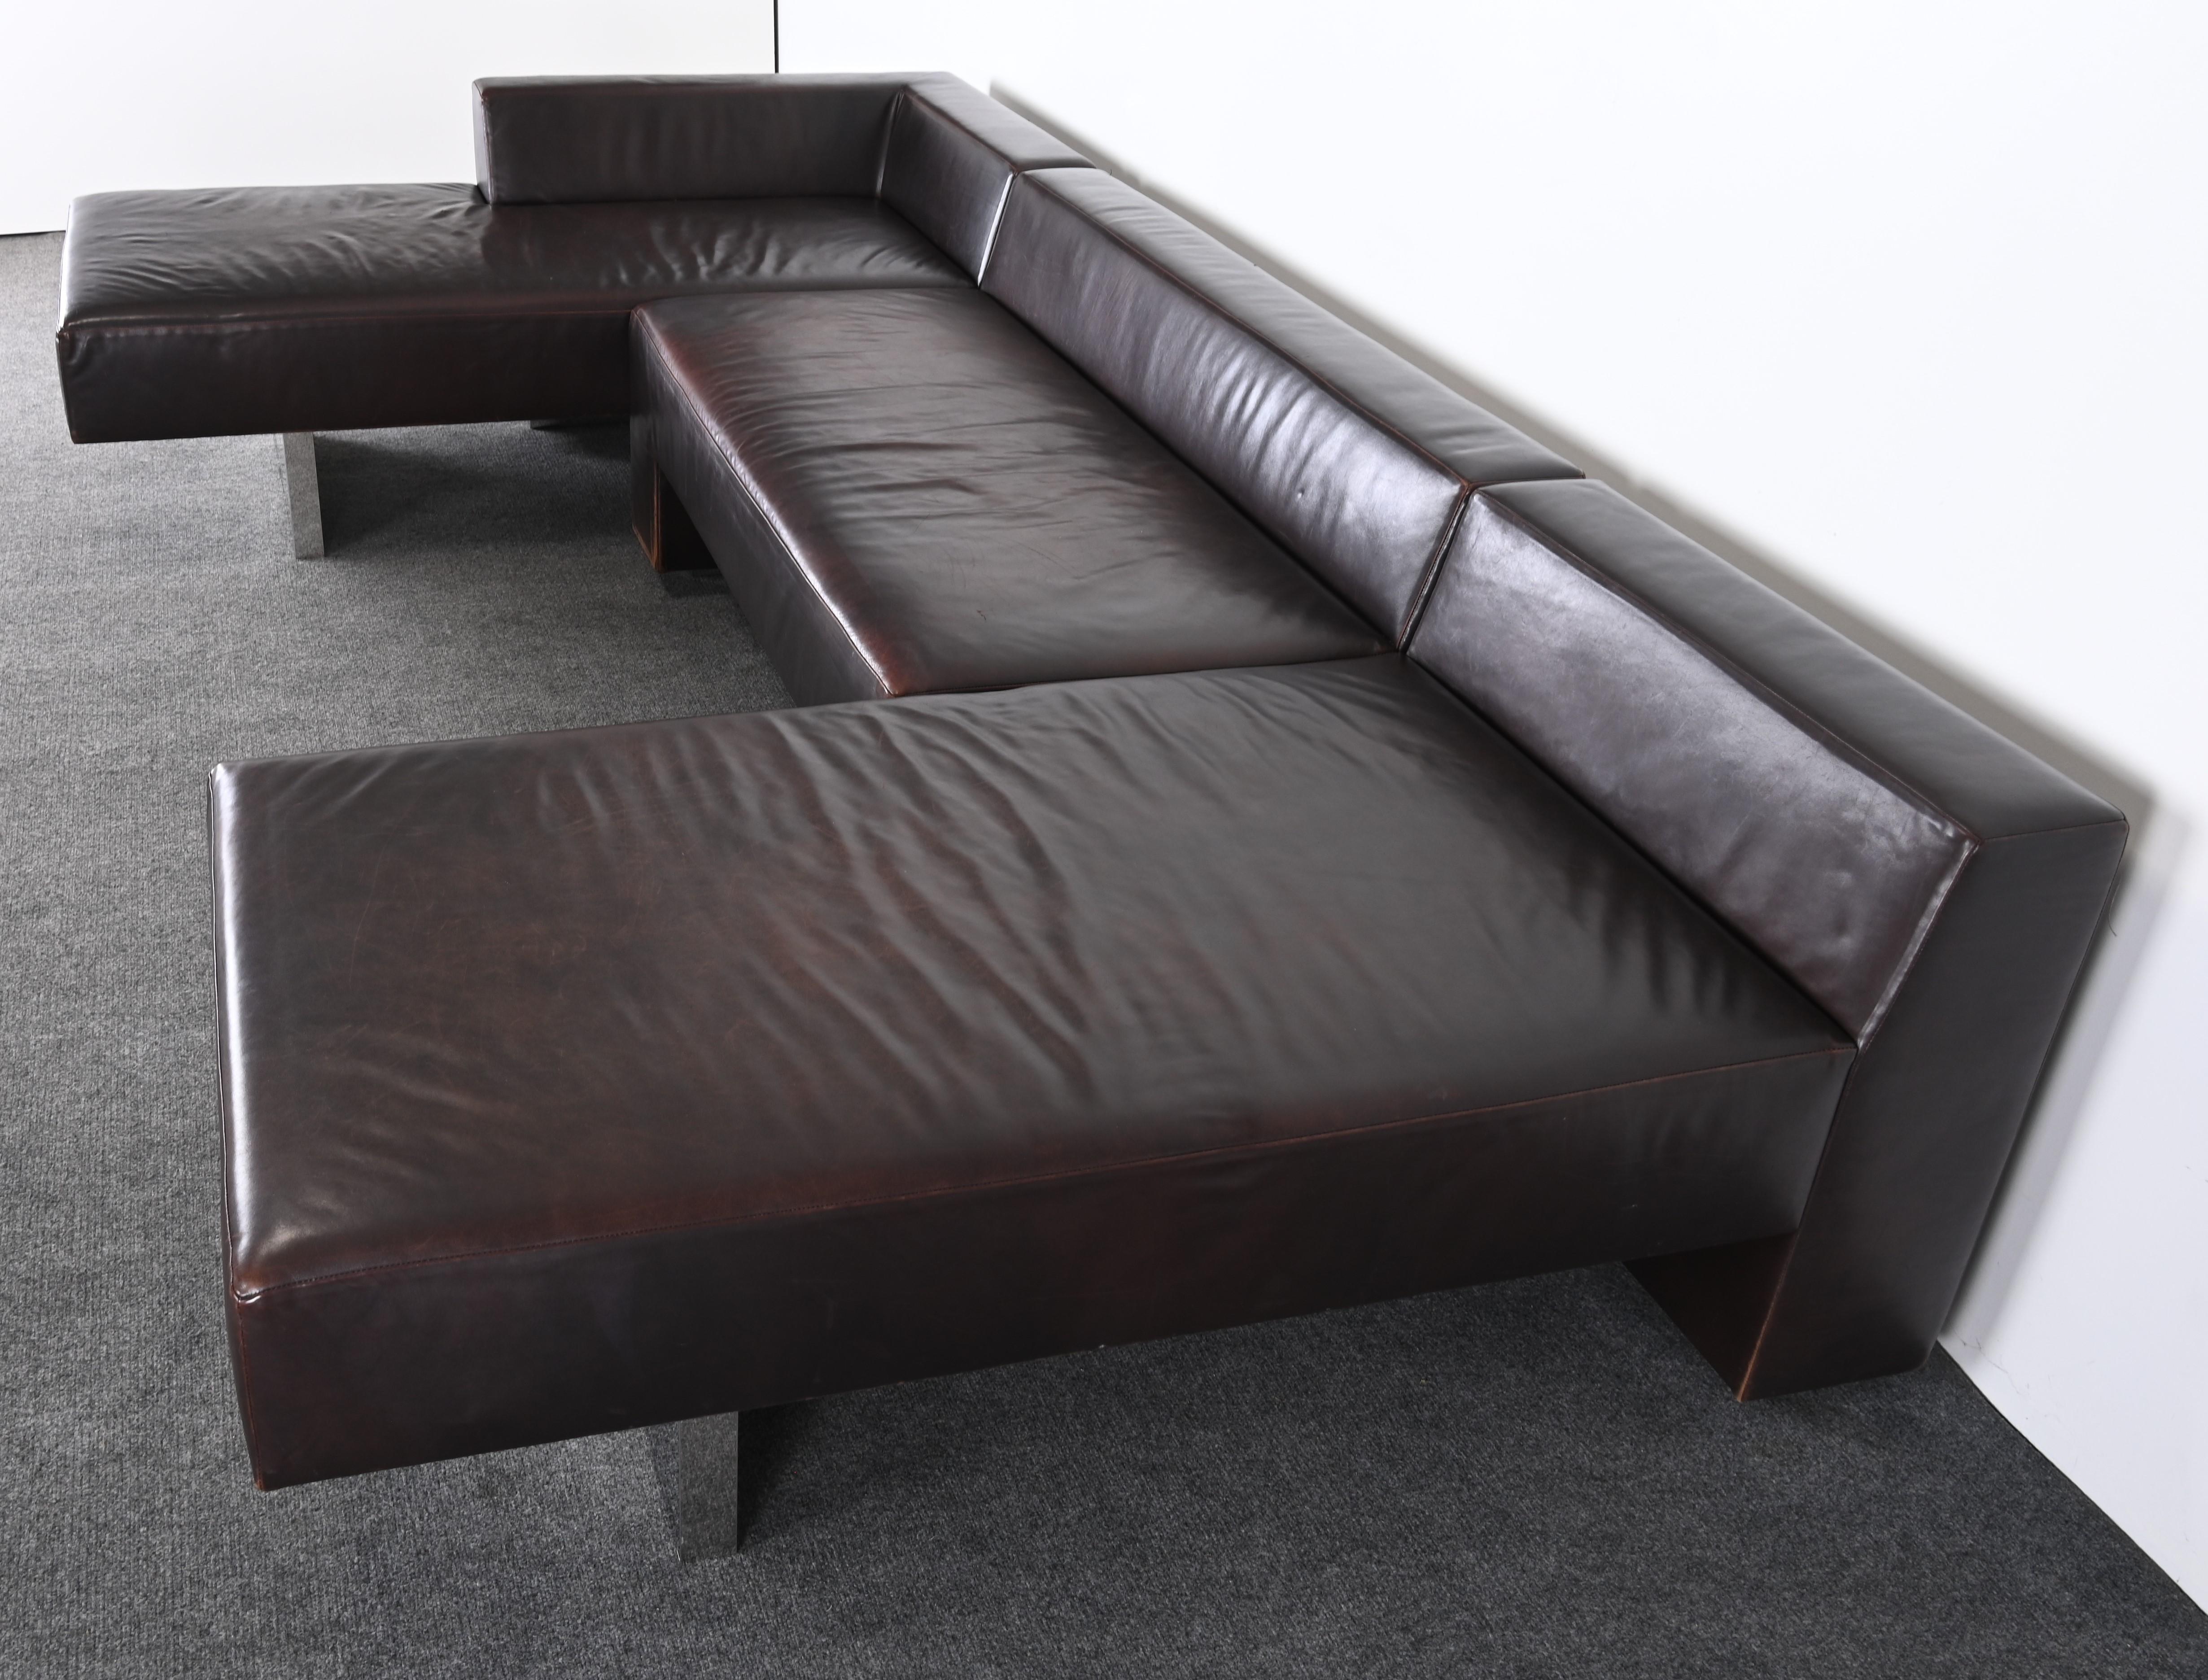 Sectional Sofa and Leather and Steel Bench by Vladimir Kagan for Gucci, 1990s 2